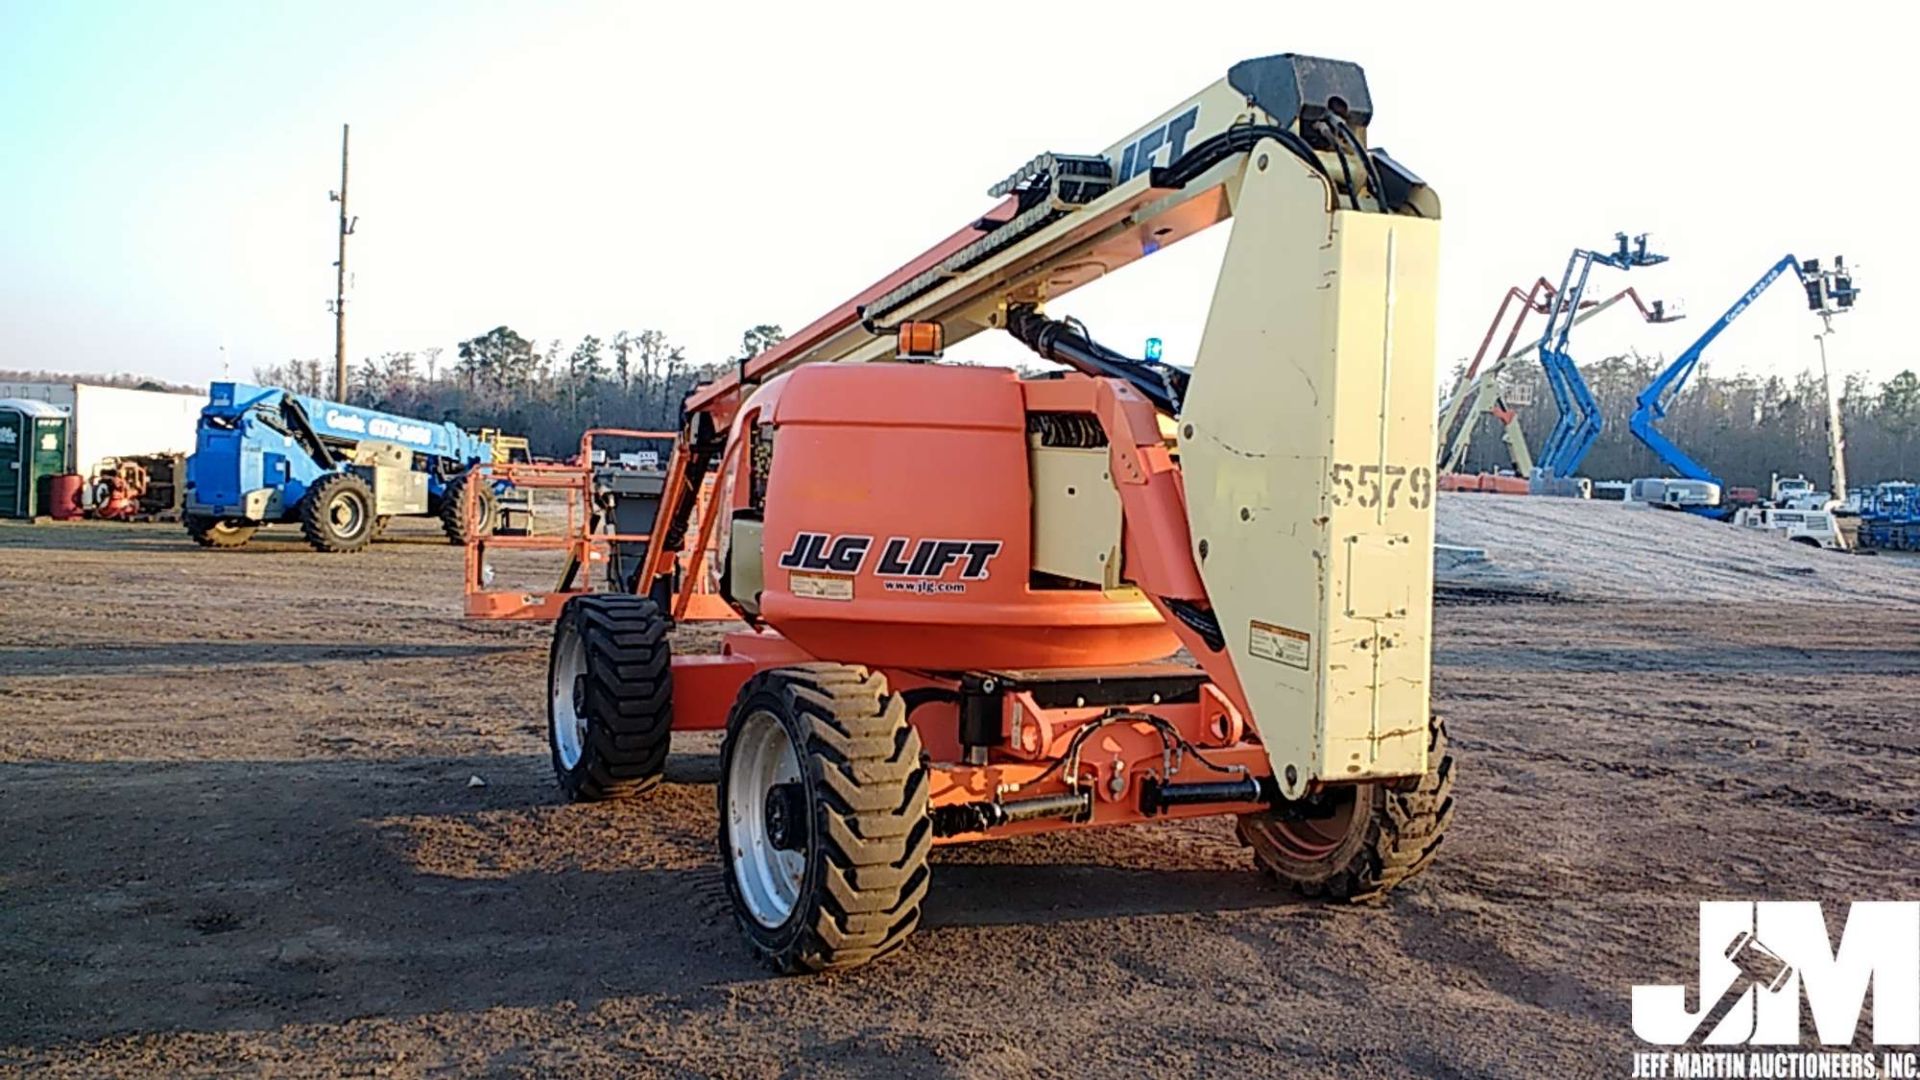 2013 JLG 600AJ 60' 4X4 ARTICULATED BOOM LIFT SN: 0300165579 - Image 3 of 27